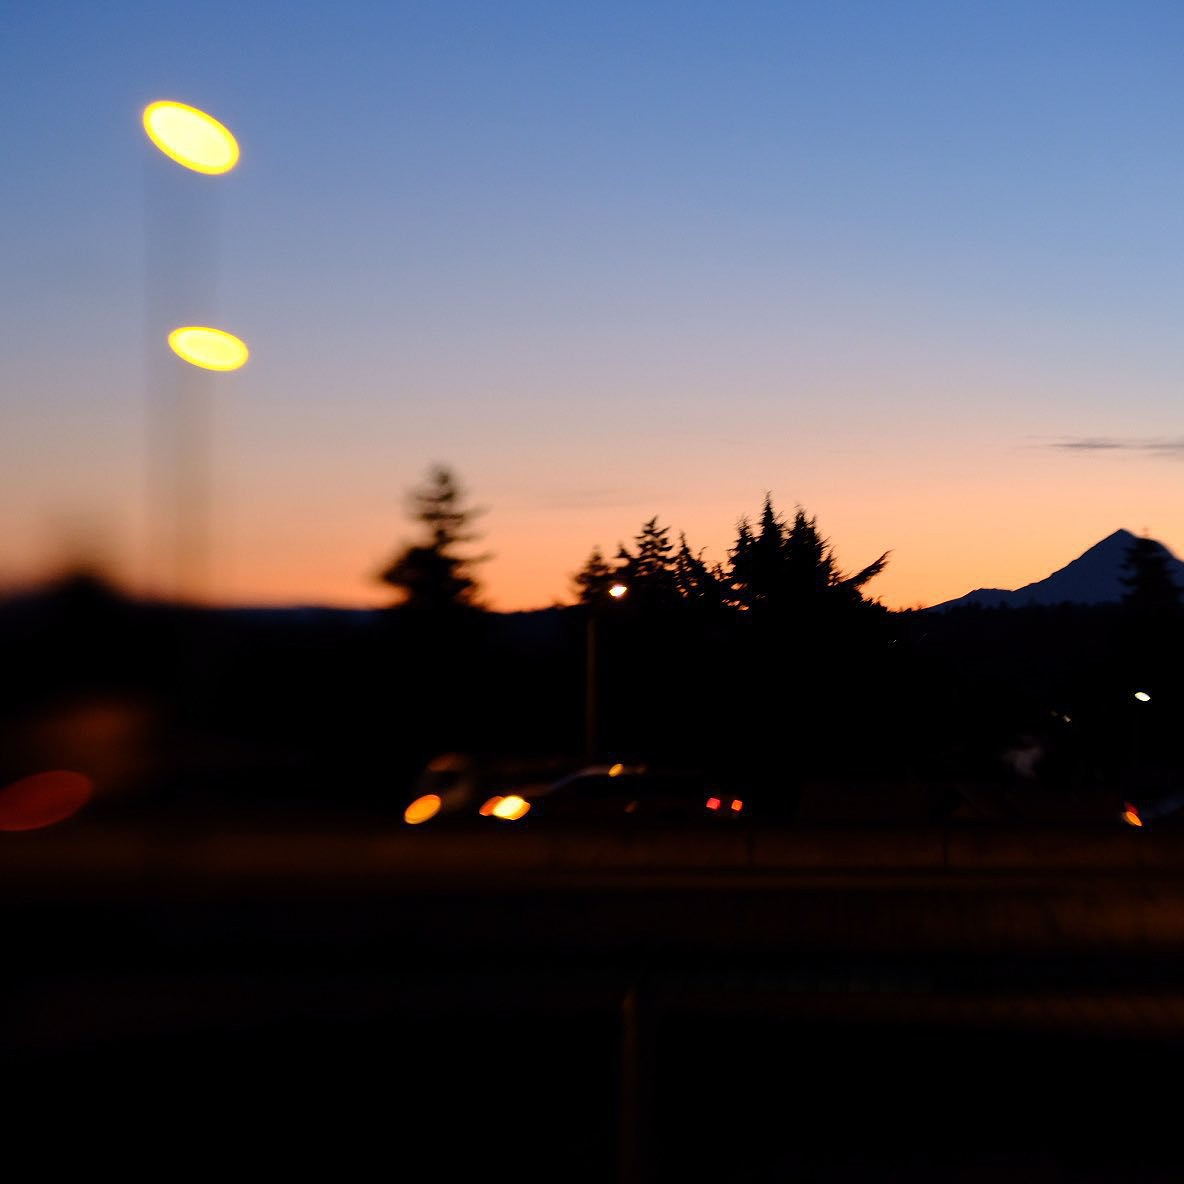 A dark and distorted sunrise picture of Mt. Hood in silhouette.